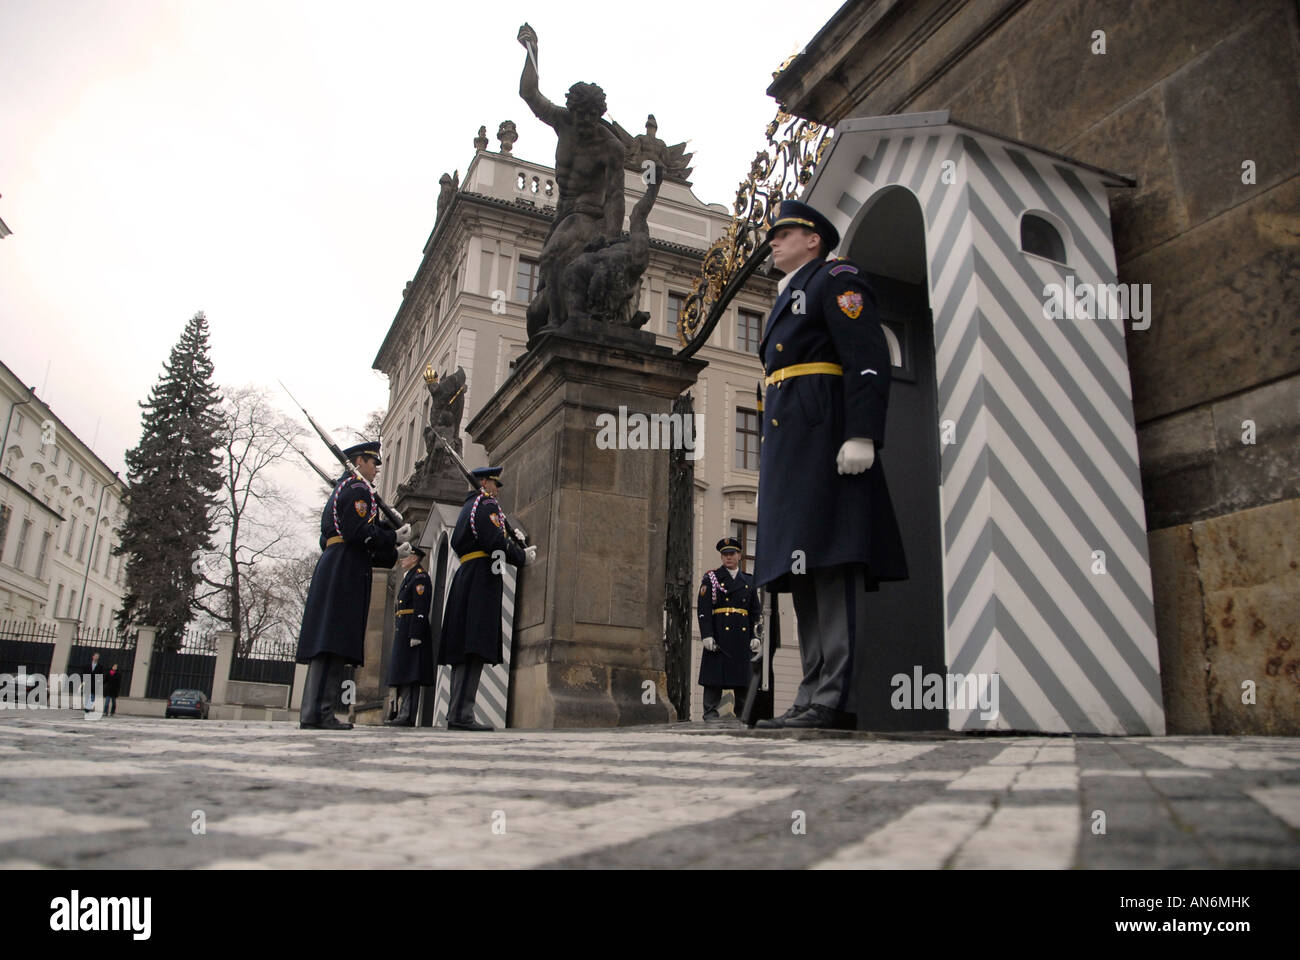 Castle guards stand firm during changing of guards process at the main entrance to Prague Castle in Czech republic Stock Photo